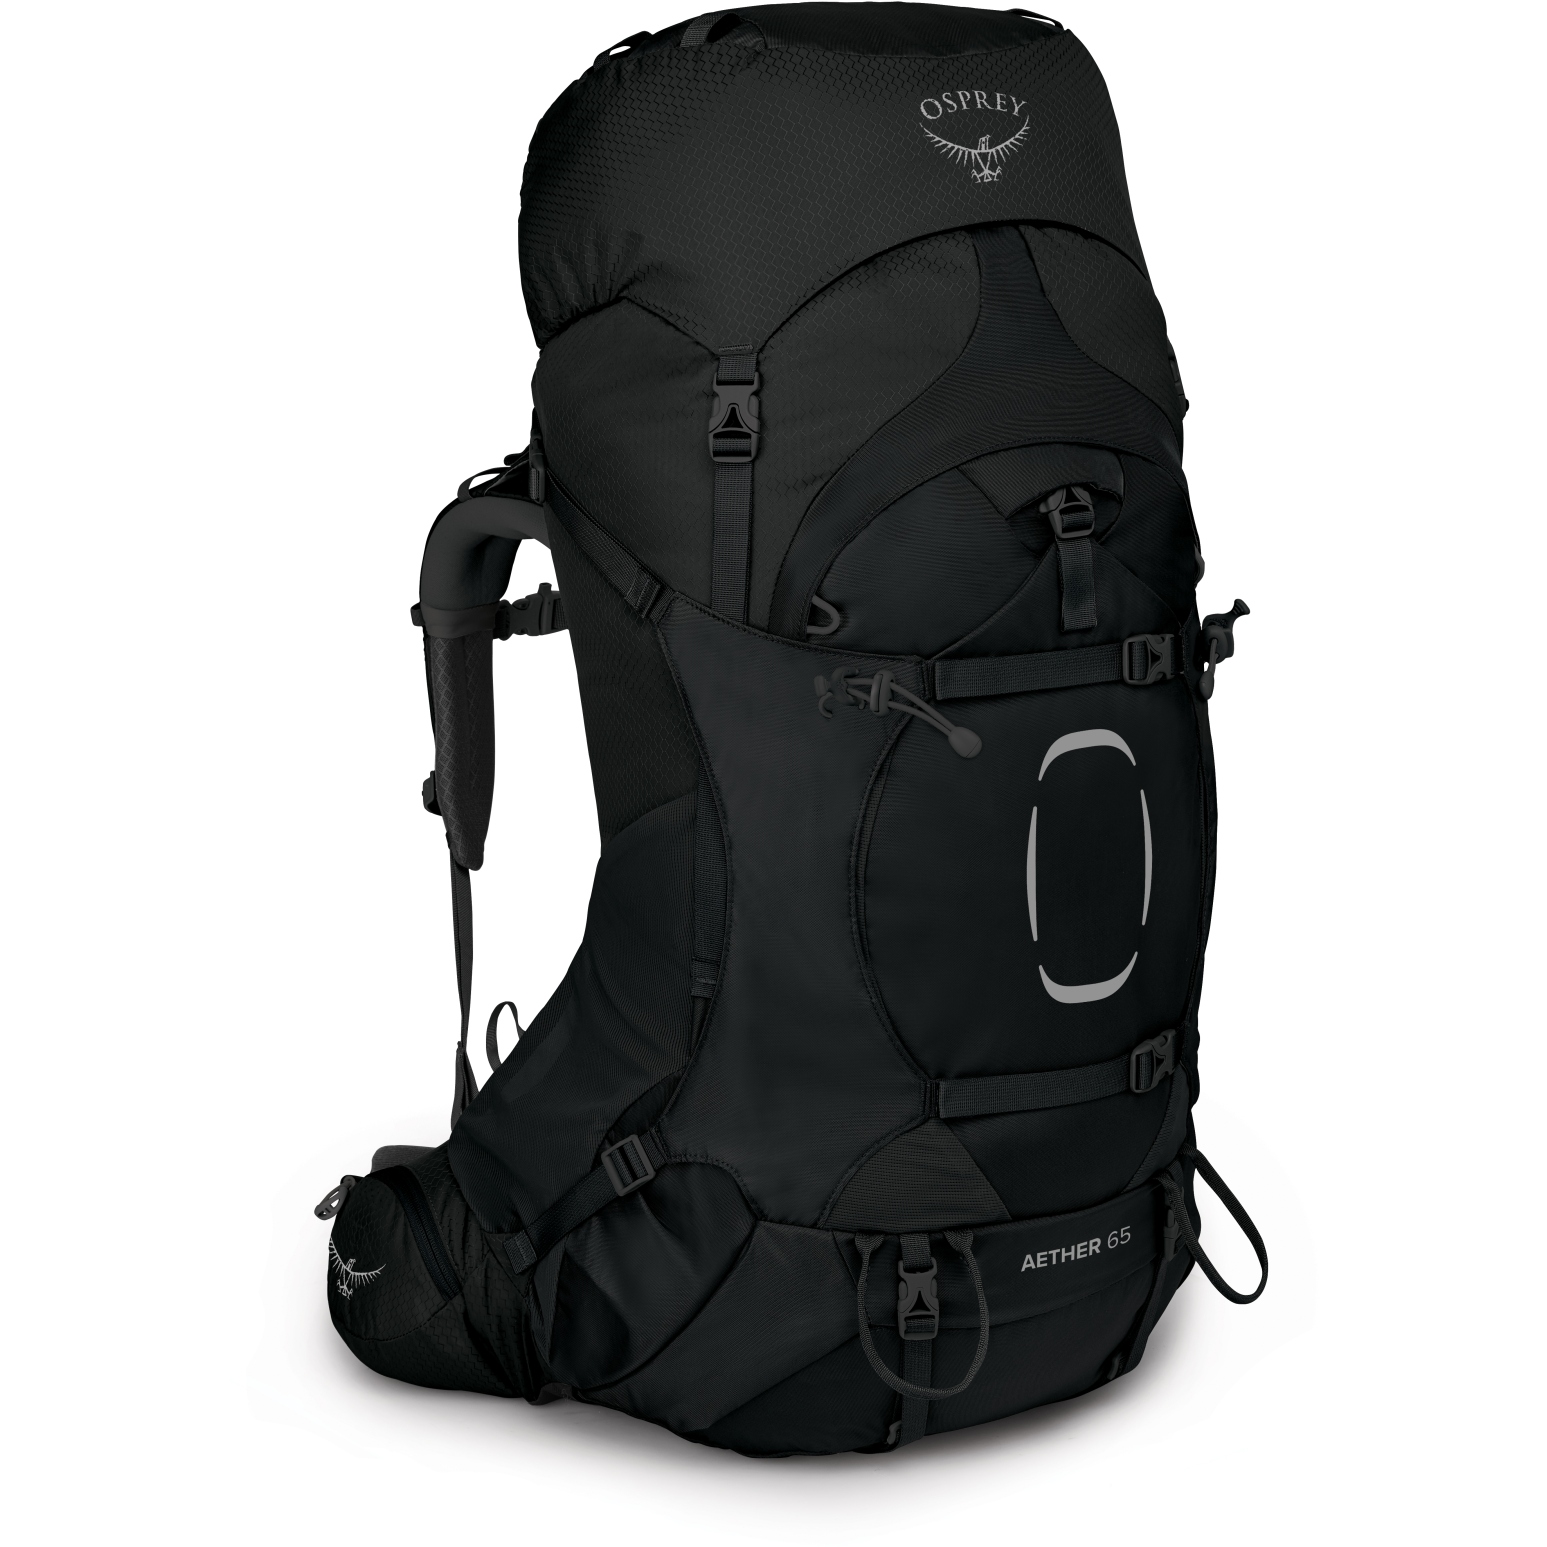 Picture of Osprey Aether 65 Backpack - Black - S/M